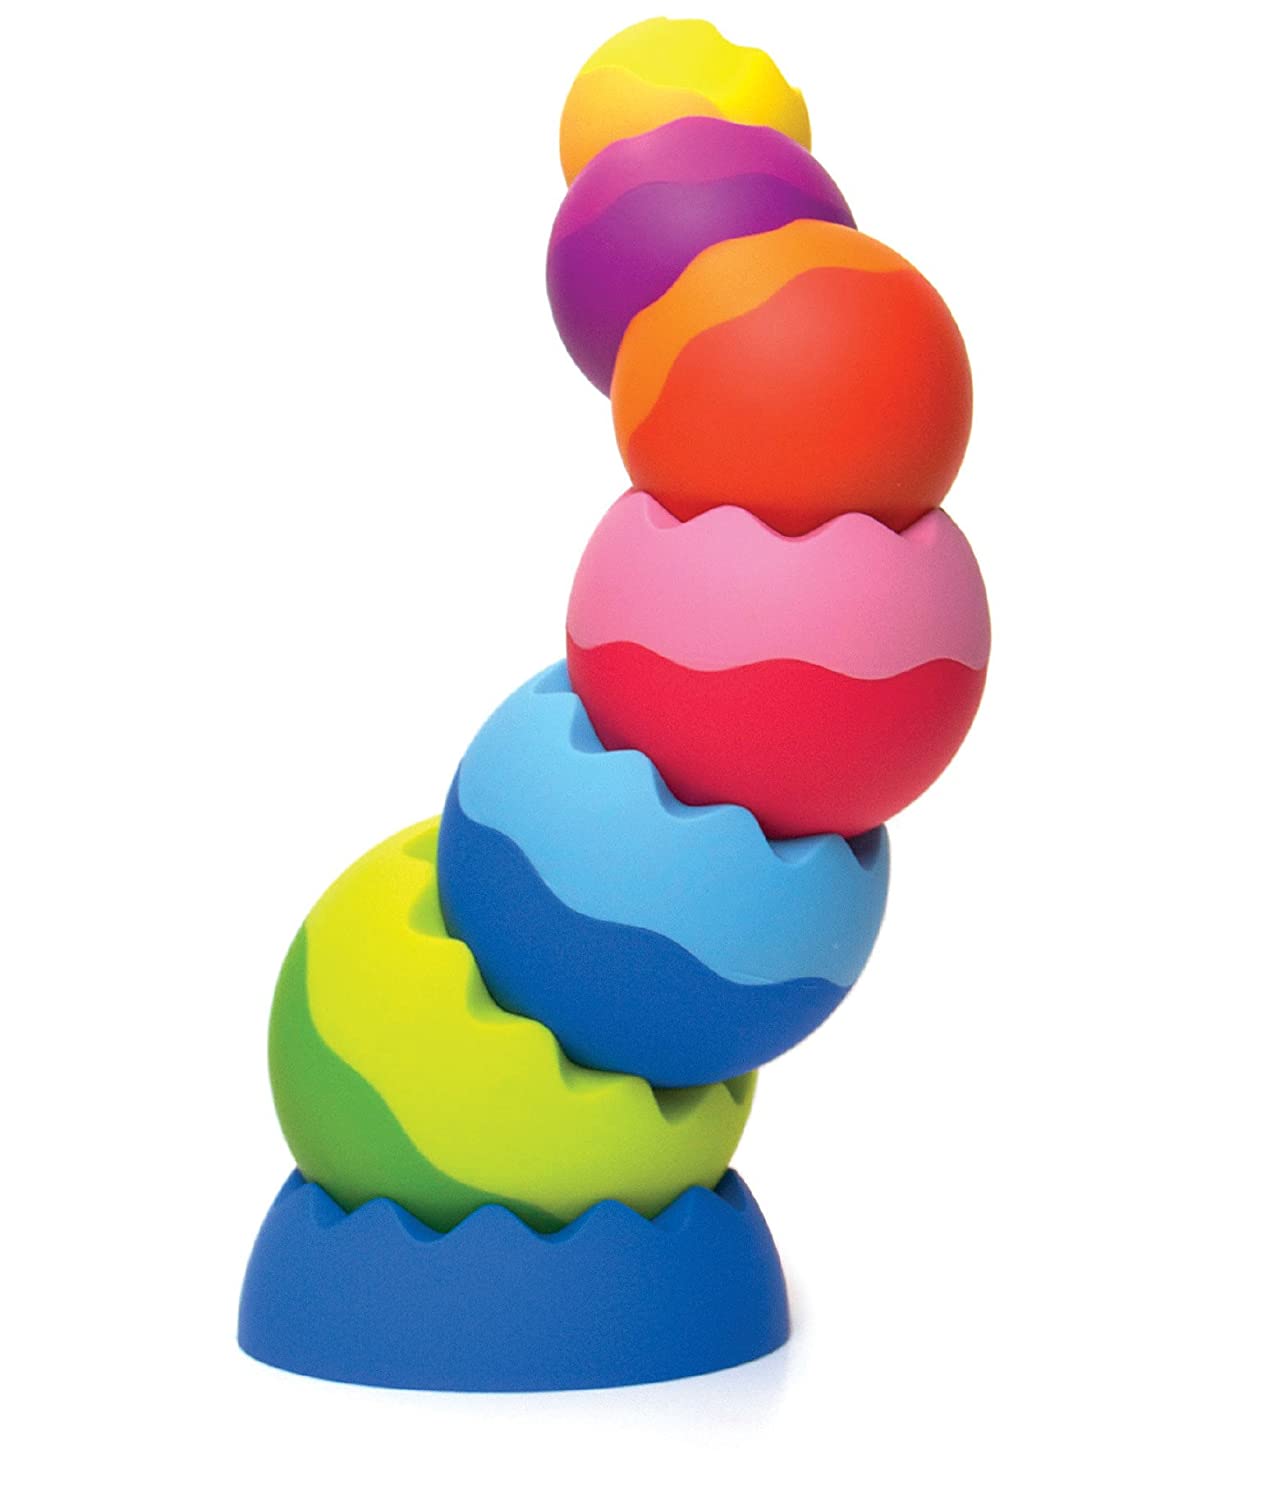 Top 9 Best Baby Stacking Toys Reviews in 2022 7